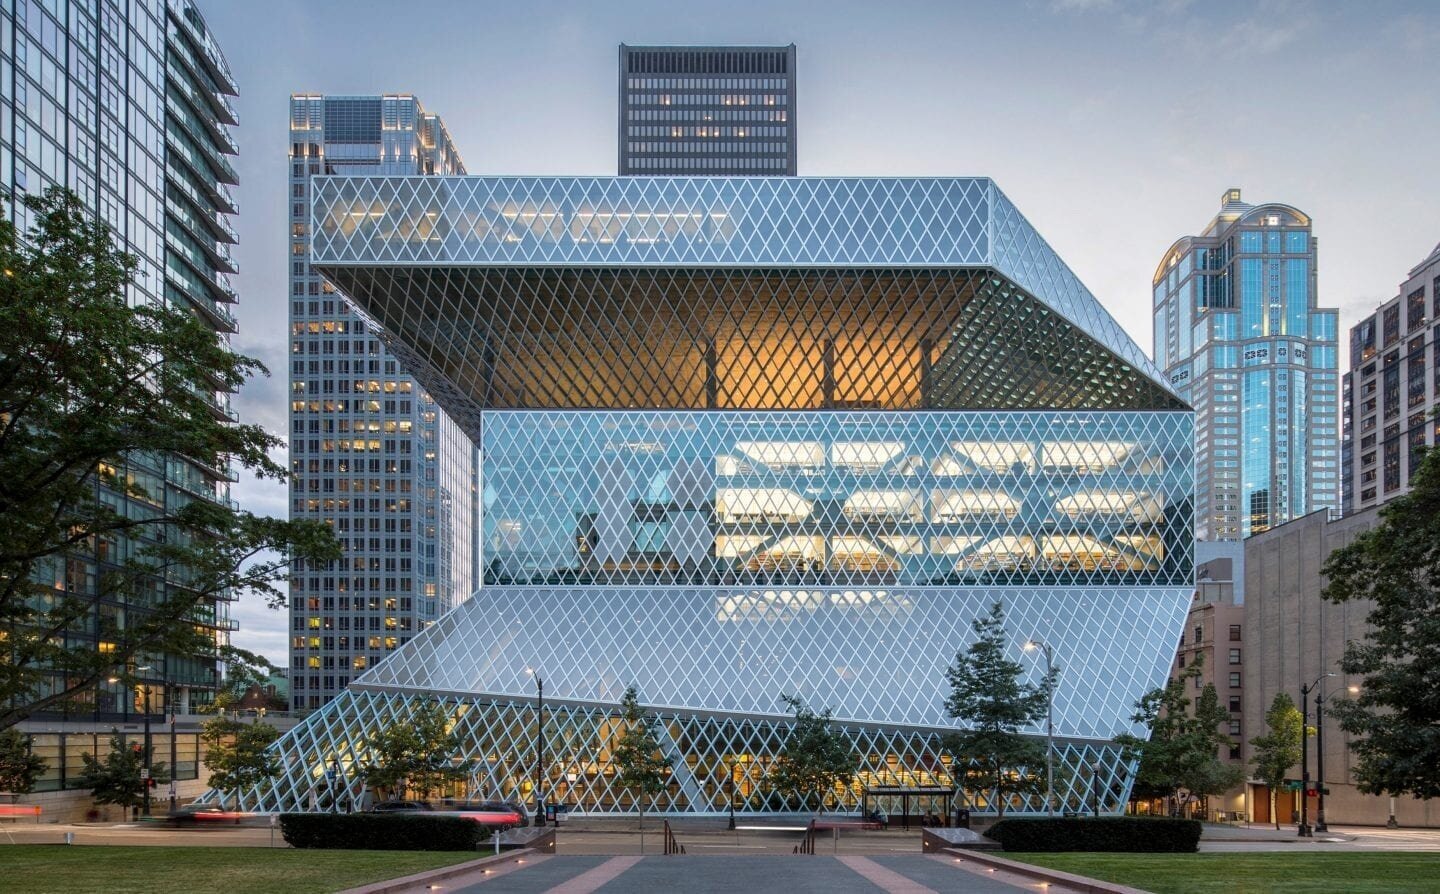 Seattle Public Library (Image source: Hoffman Construction Corp.)